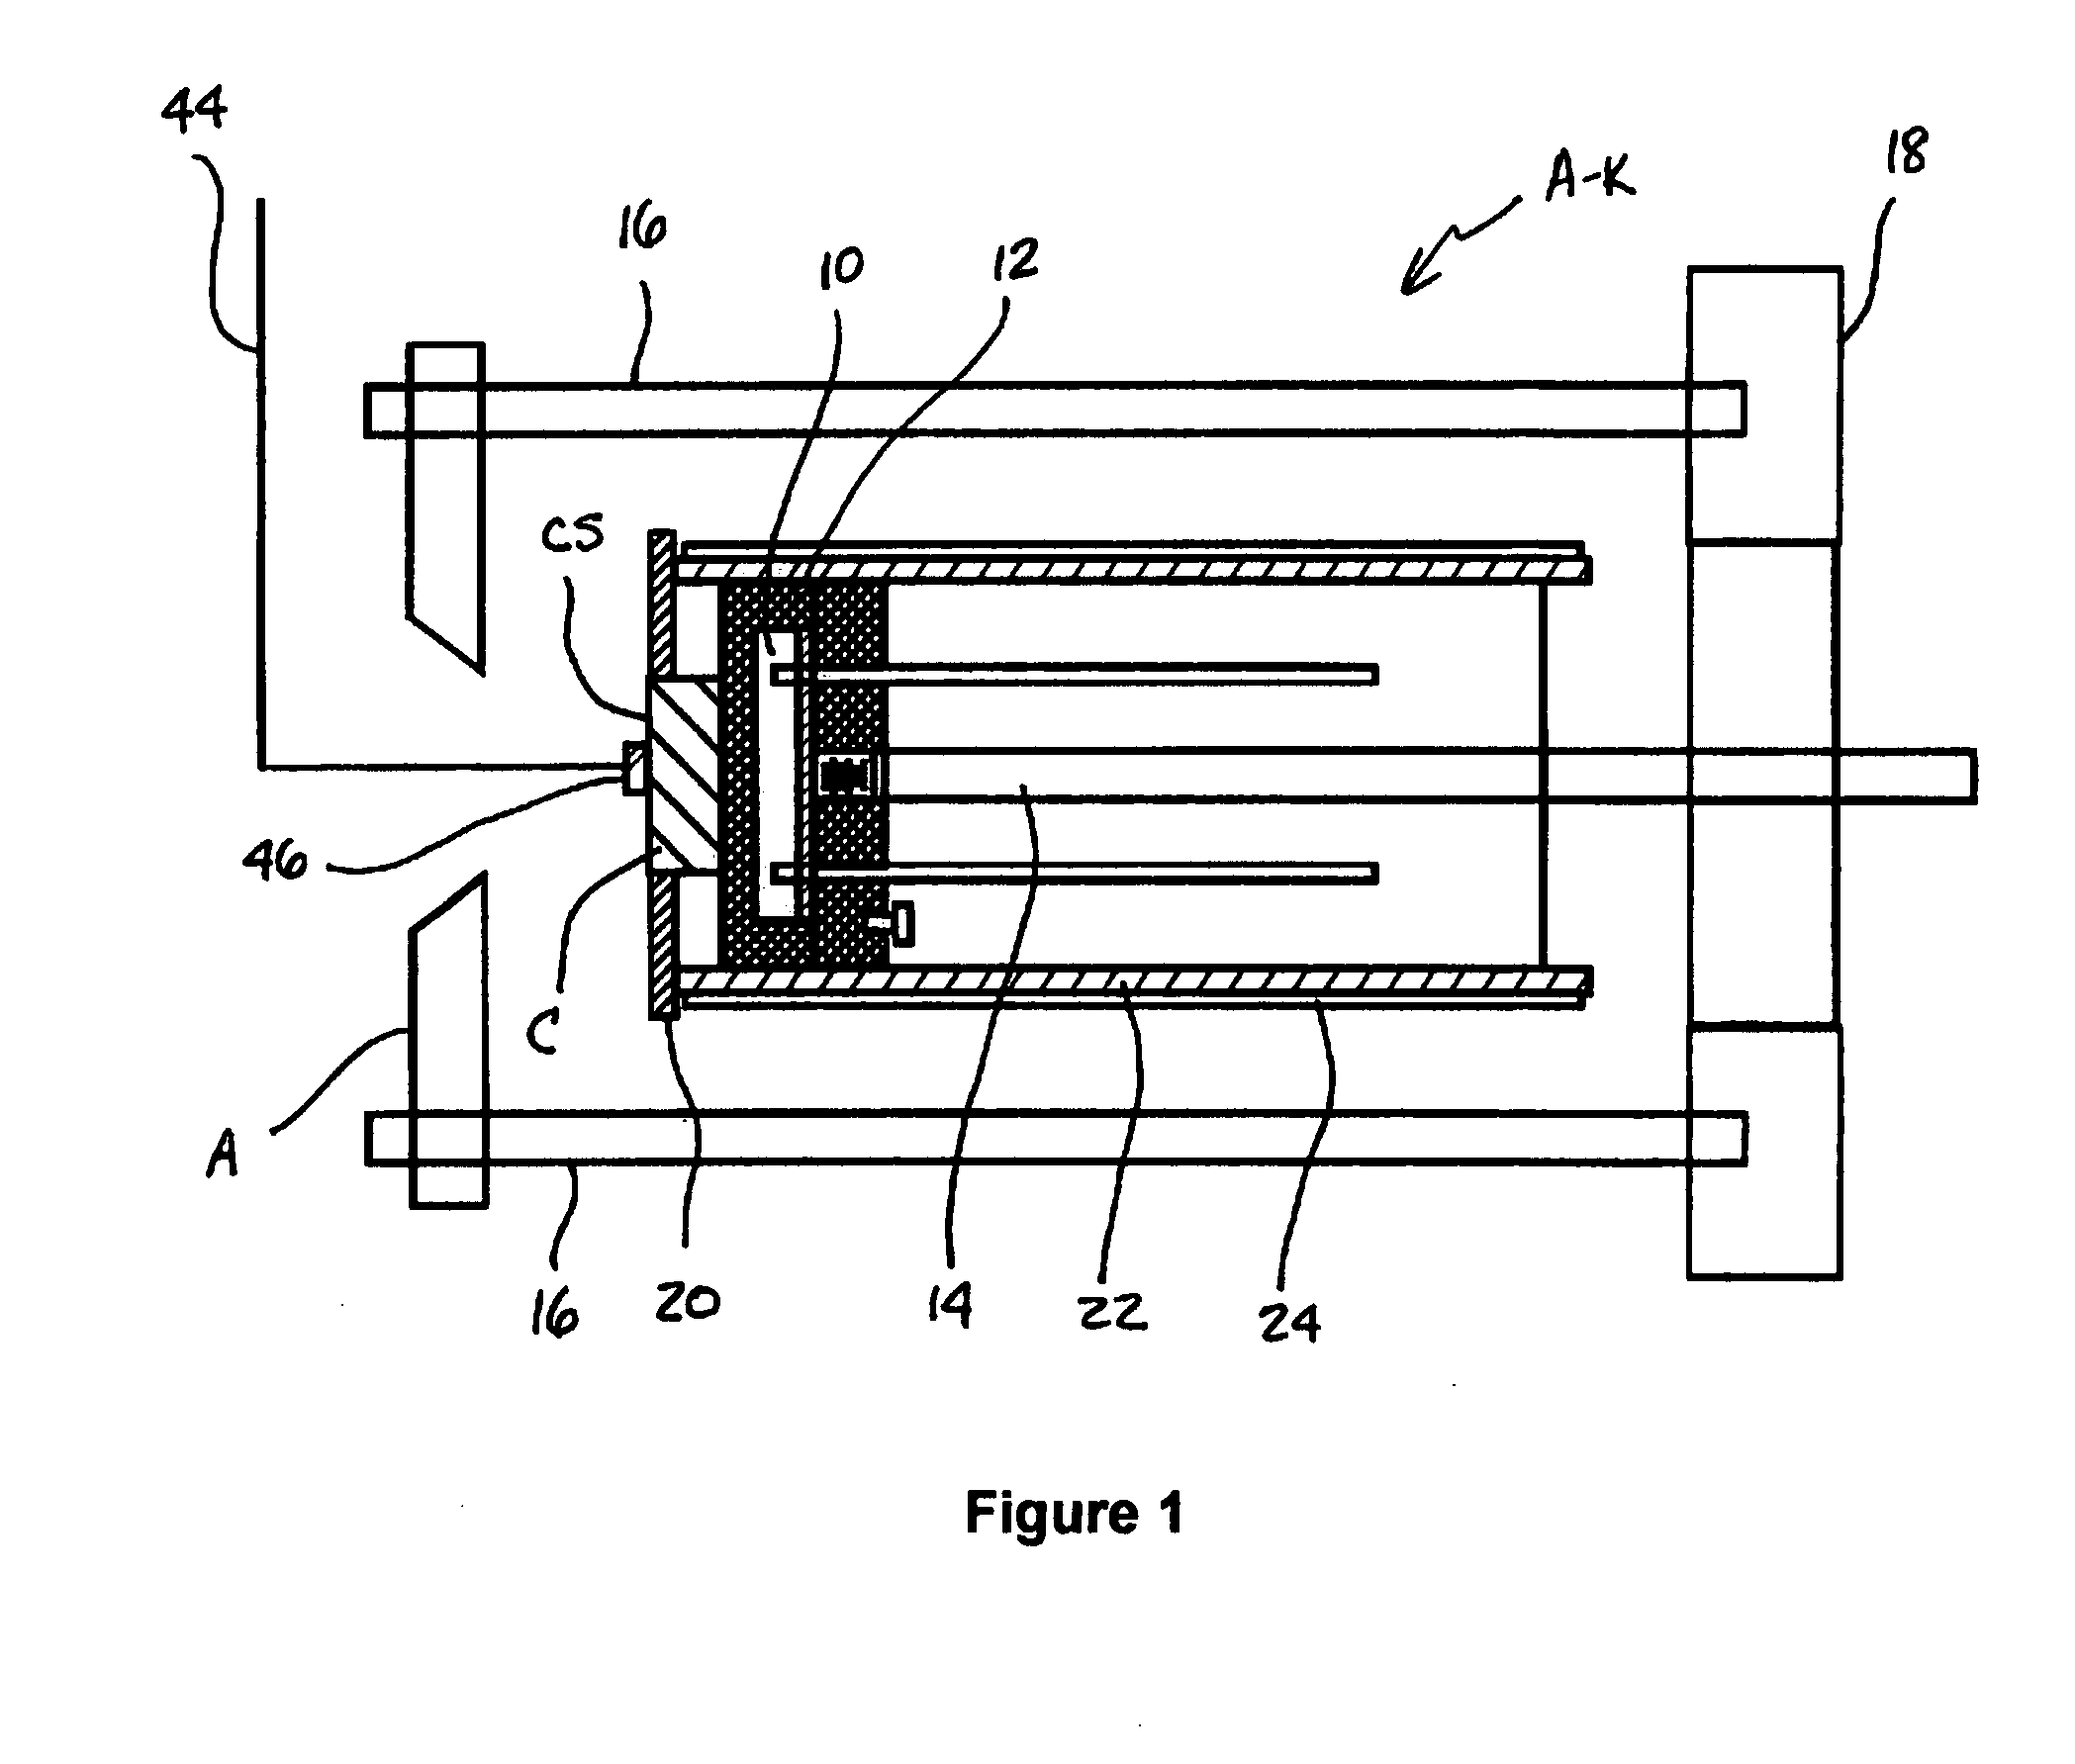 Coated medical device and method of making